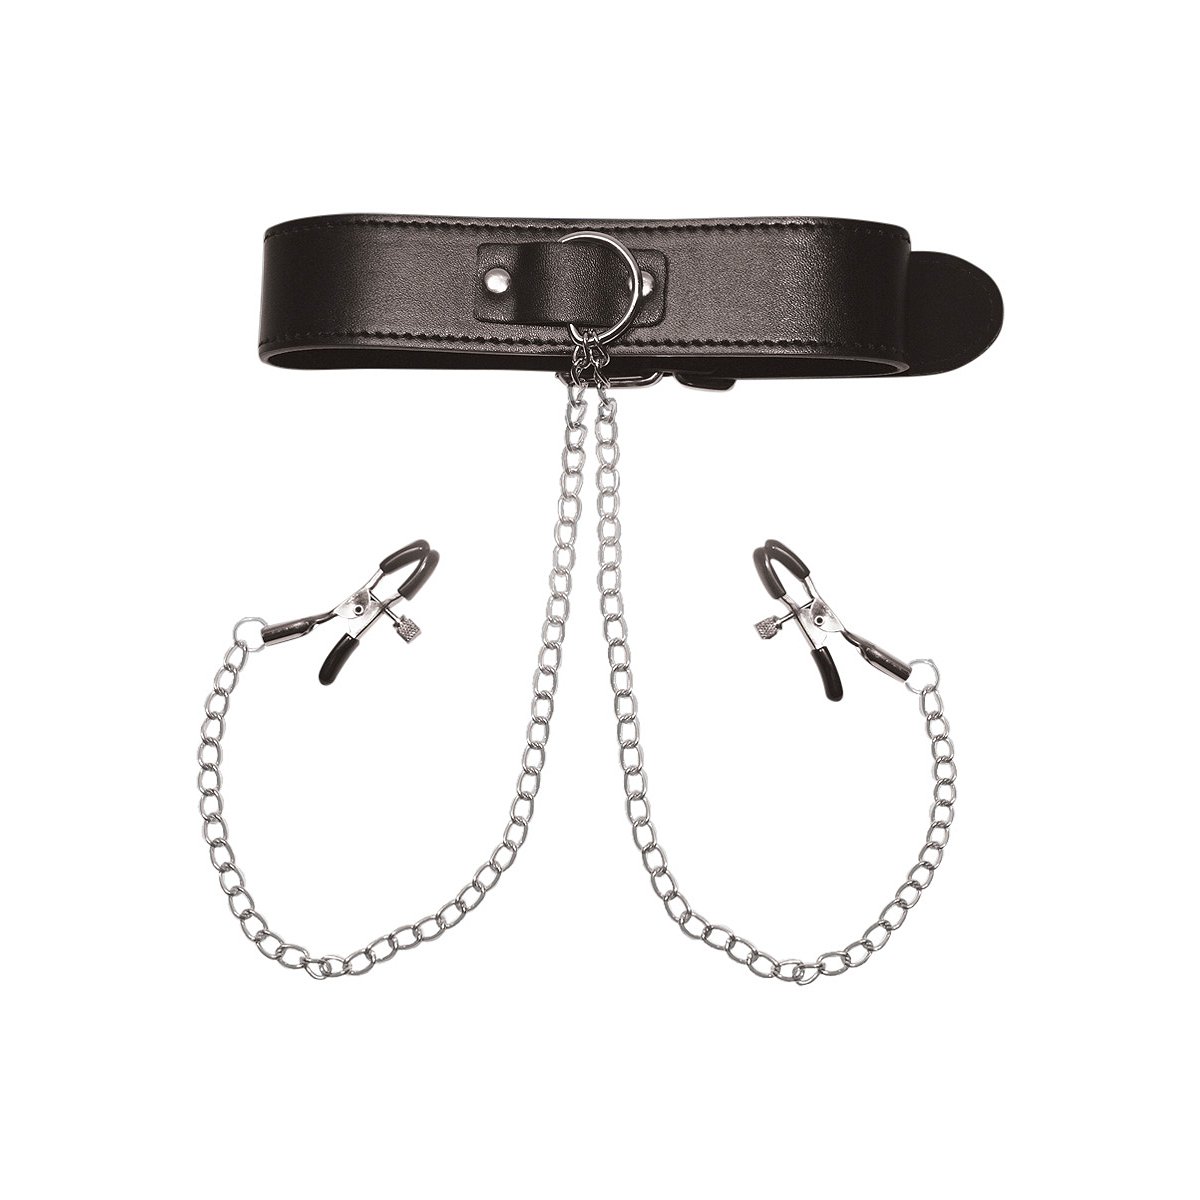 Collar with Nipple Clamps - Pleasure Bound
